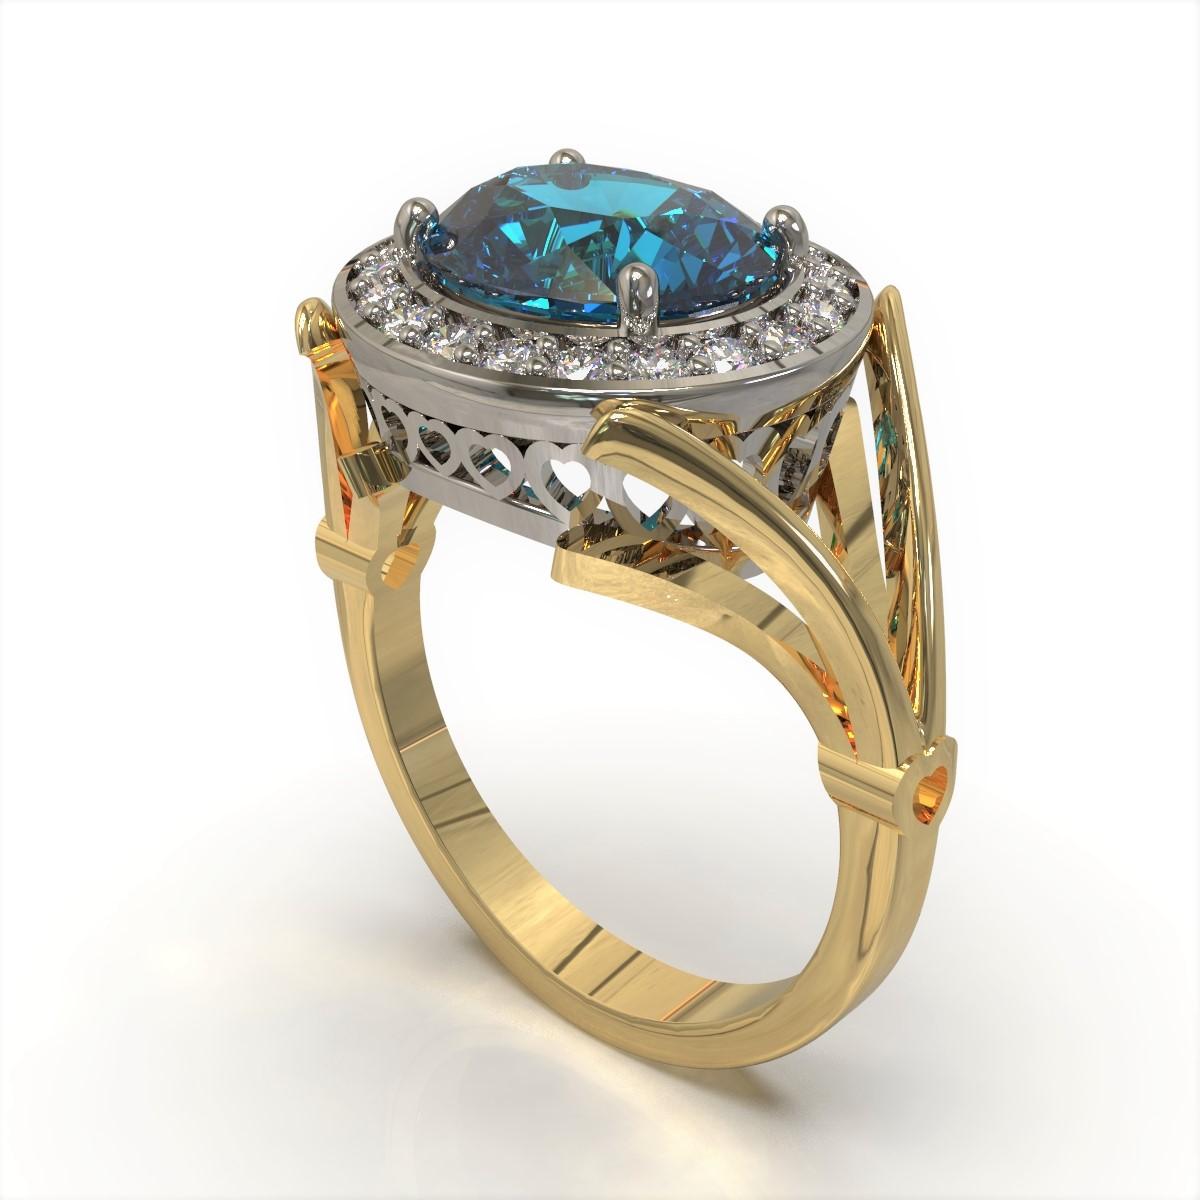 Apatite and Diamond Ring

Art Deco style, this elegant ring is made in platinum and 18 carat yellow gold, set with a stunning oval cut natural Burmese Apatite and round brilliant cut diamonds. 

Appetite: Medium light greenish blue. Eye Clean,